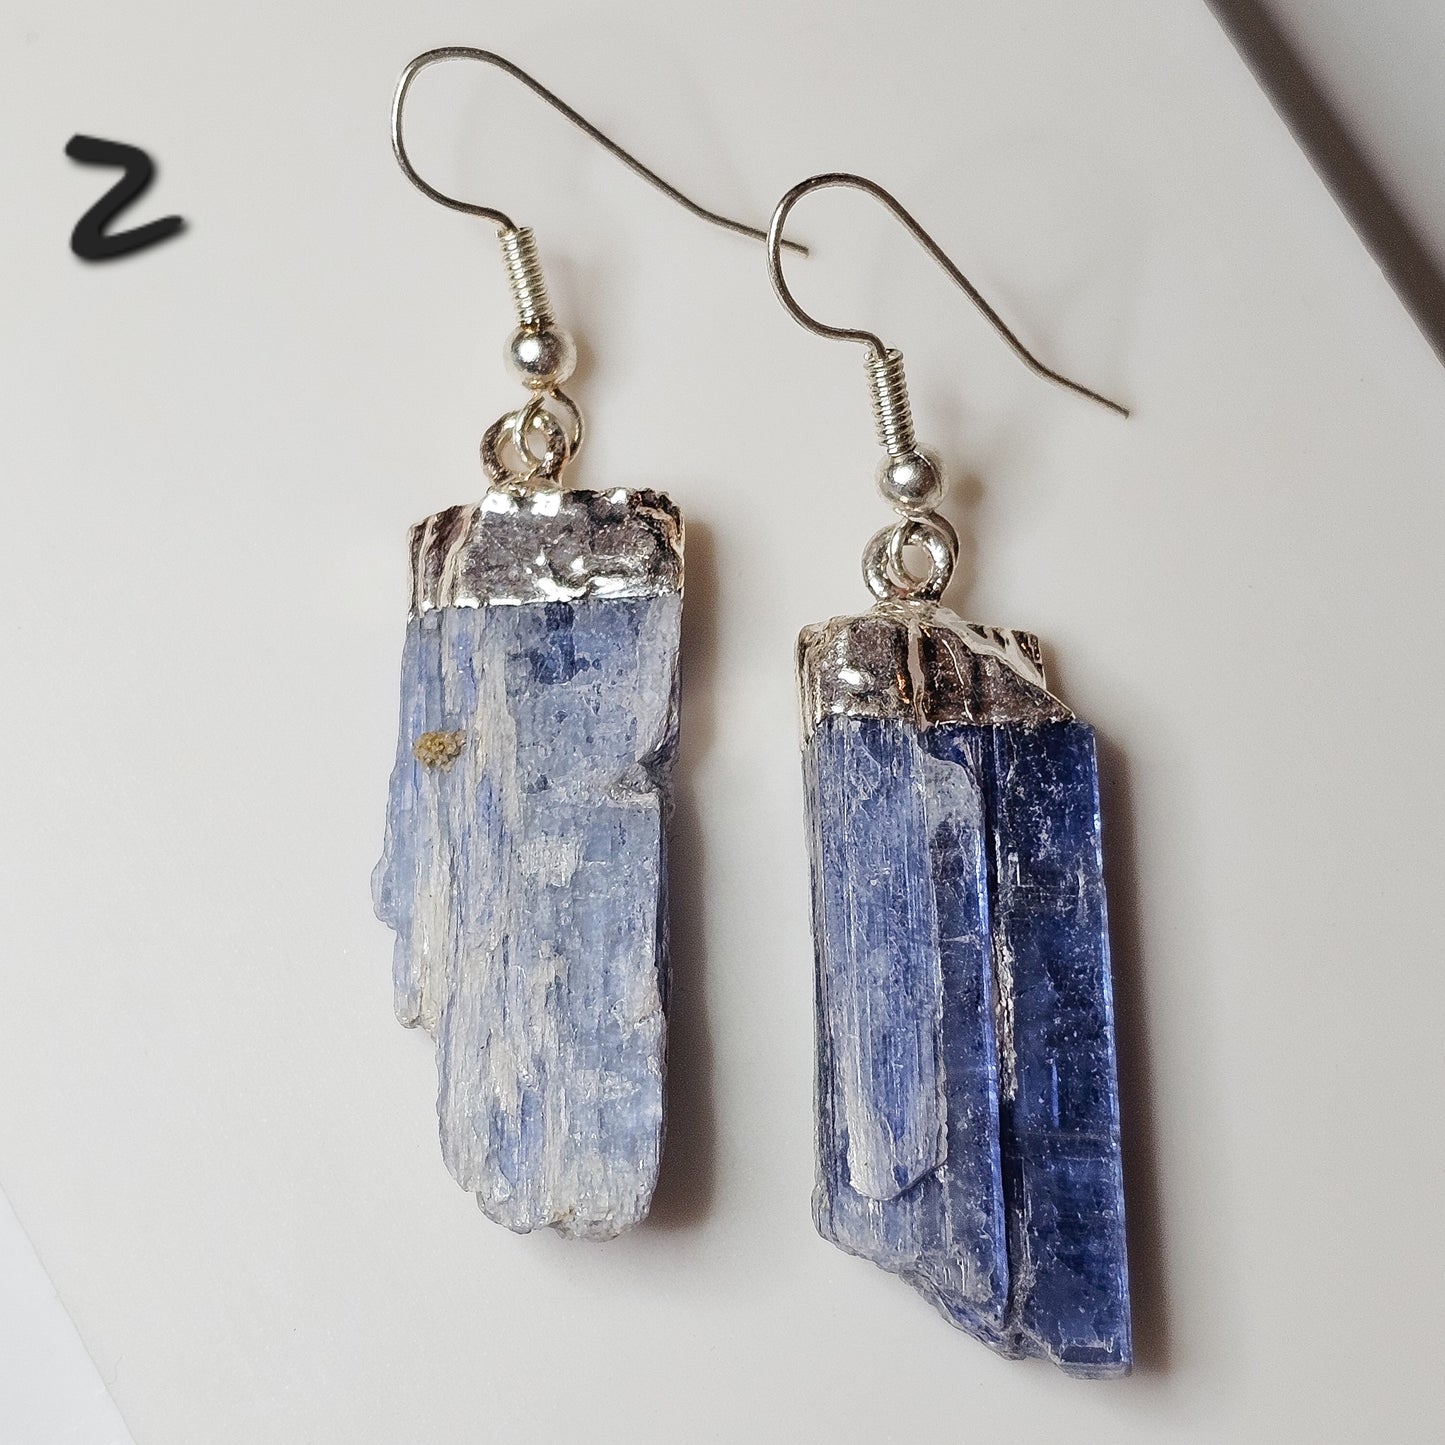 Kyanite silver plated earrings with hypo-allergenic ear wires.